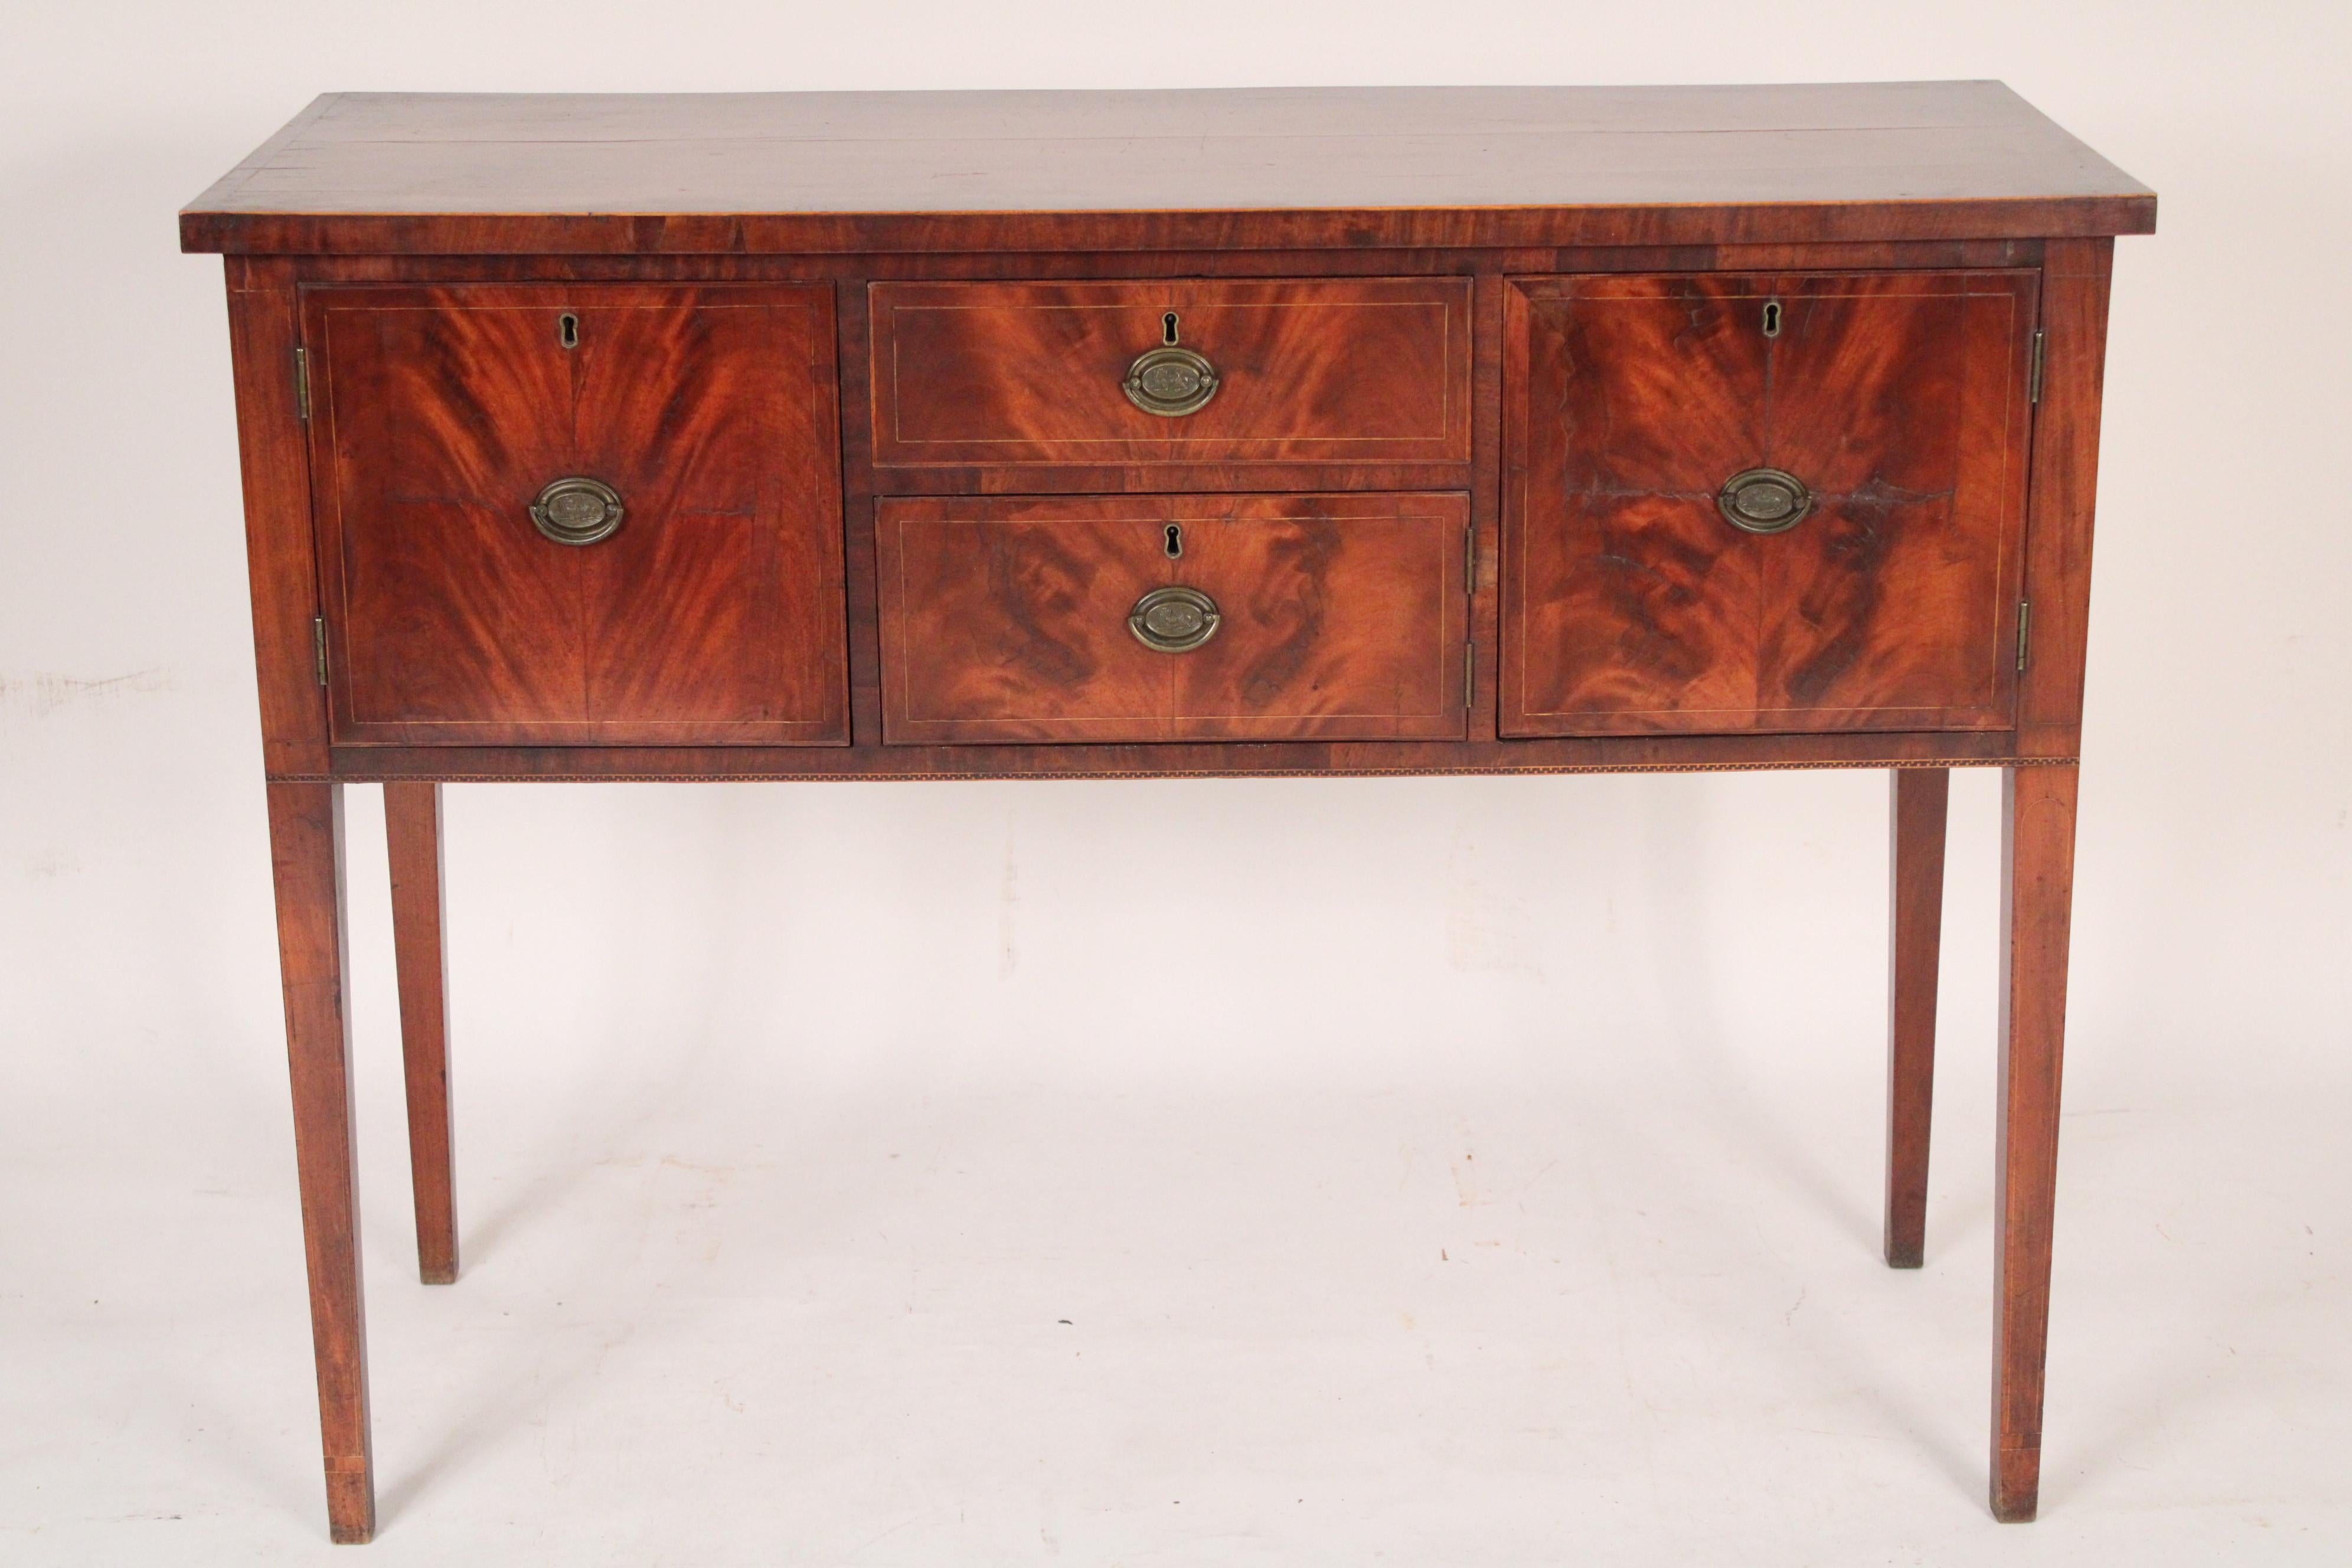 American Federal mahogany sideboard, circa 1810. With a string inlaid slightly over hanging rectangular top, two flame mahogany outer doors flanking two flame mahogany drawers resting on square tapered legs. Interesting brass hardware with lions in